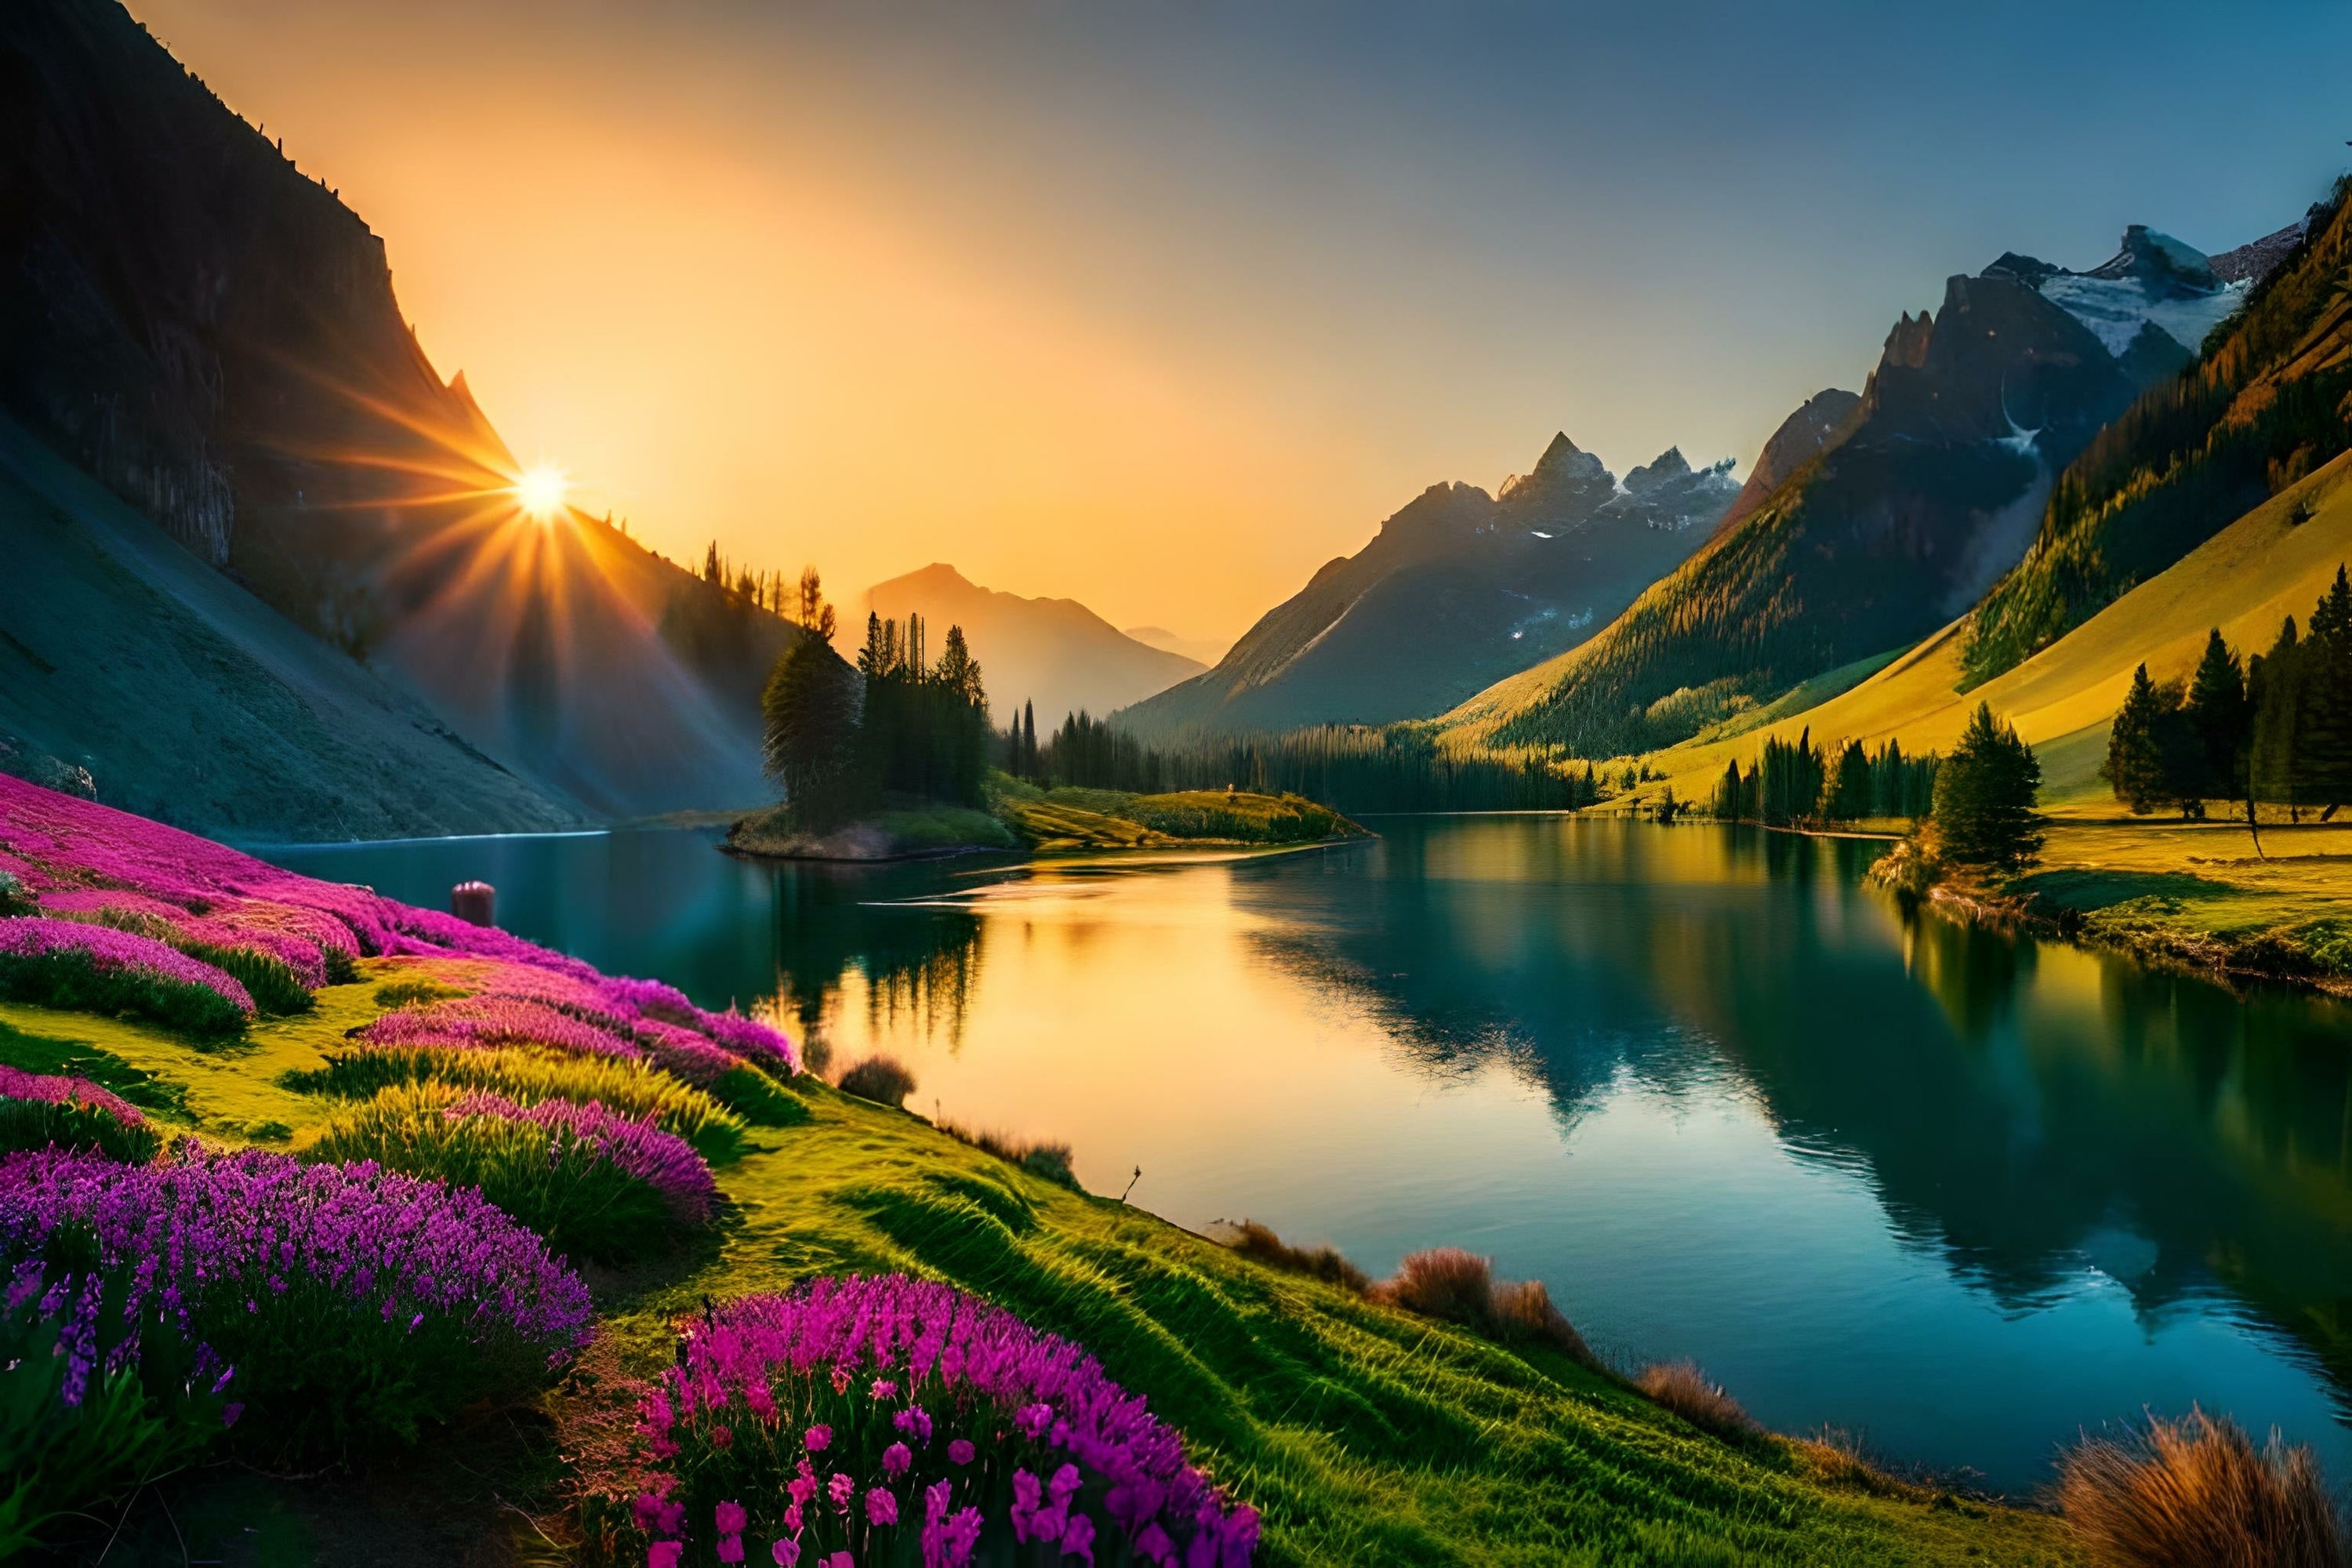 beautiful image of the lake, green grass, pink flowers, mountains, blue skies and the sunsetting